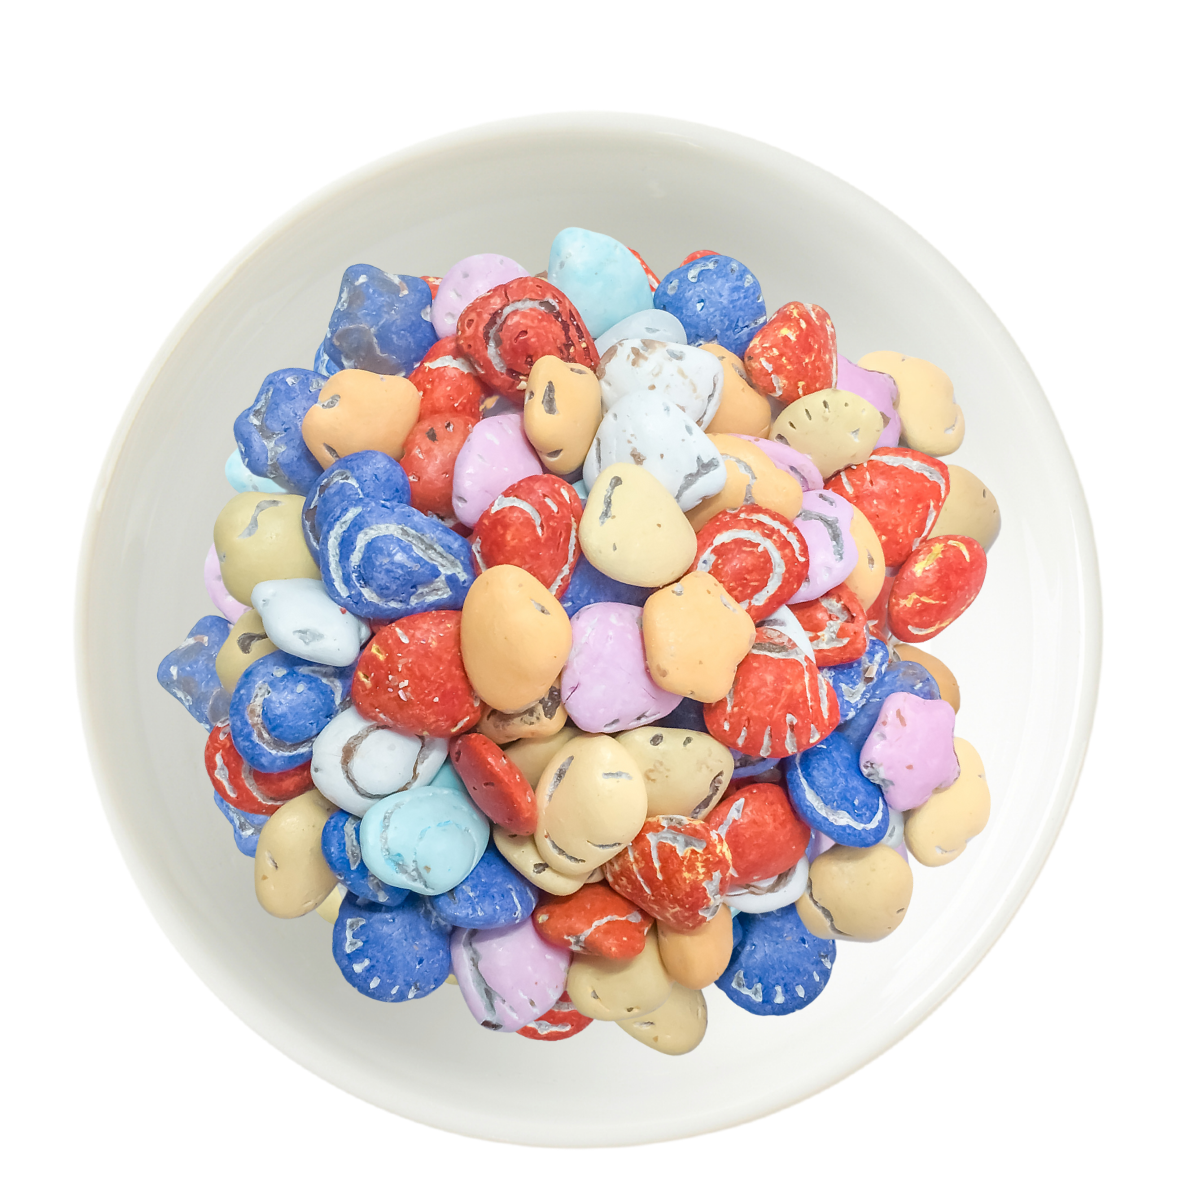 Edible Gem Stones Beach River Sea Side Chocolate Rocks For Cake Decoration  and Candy Buffets (8oz Landscape)